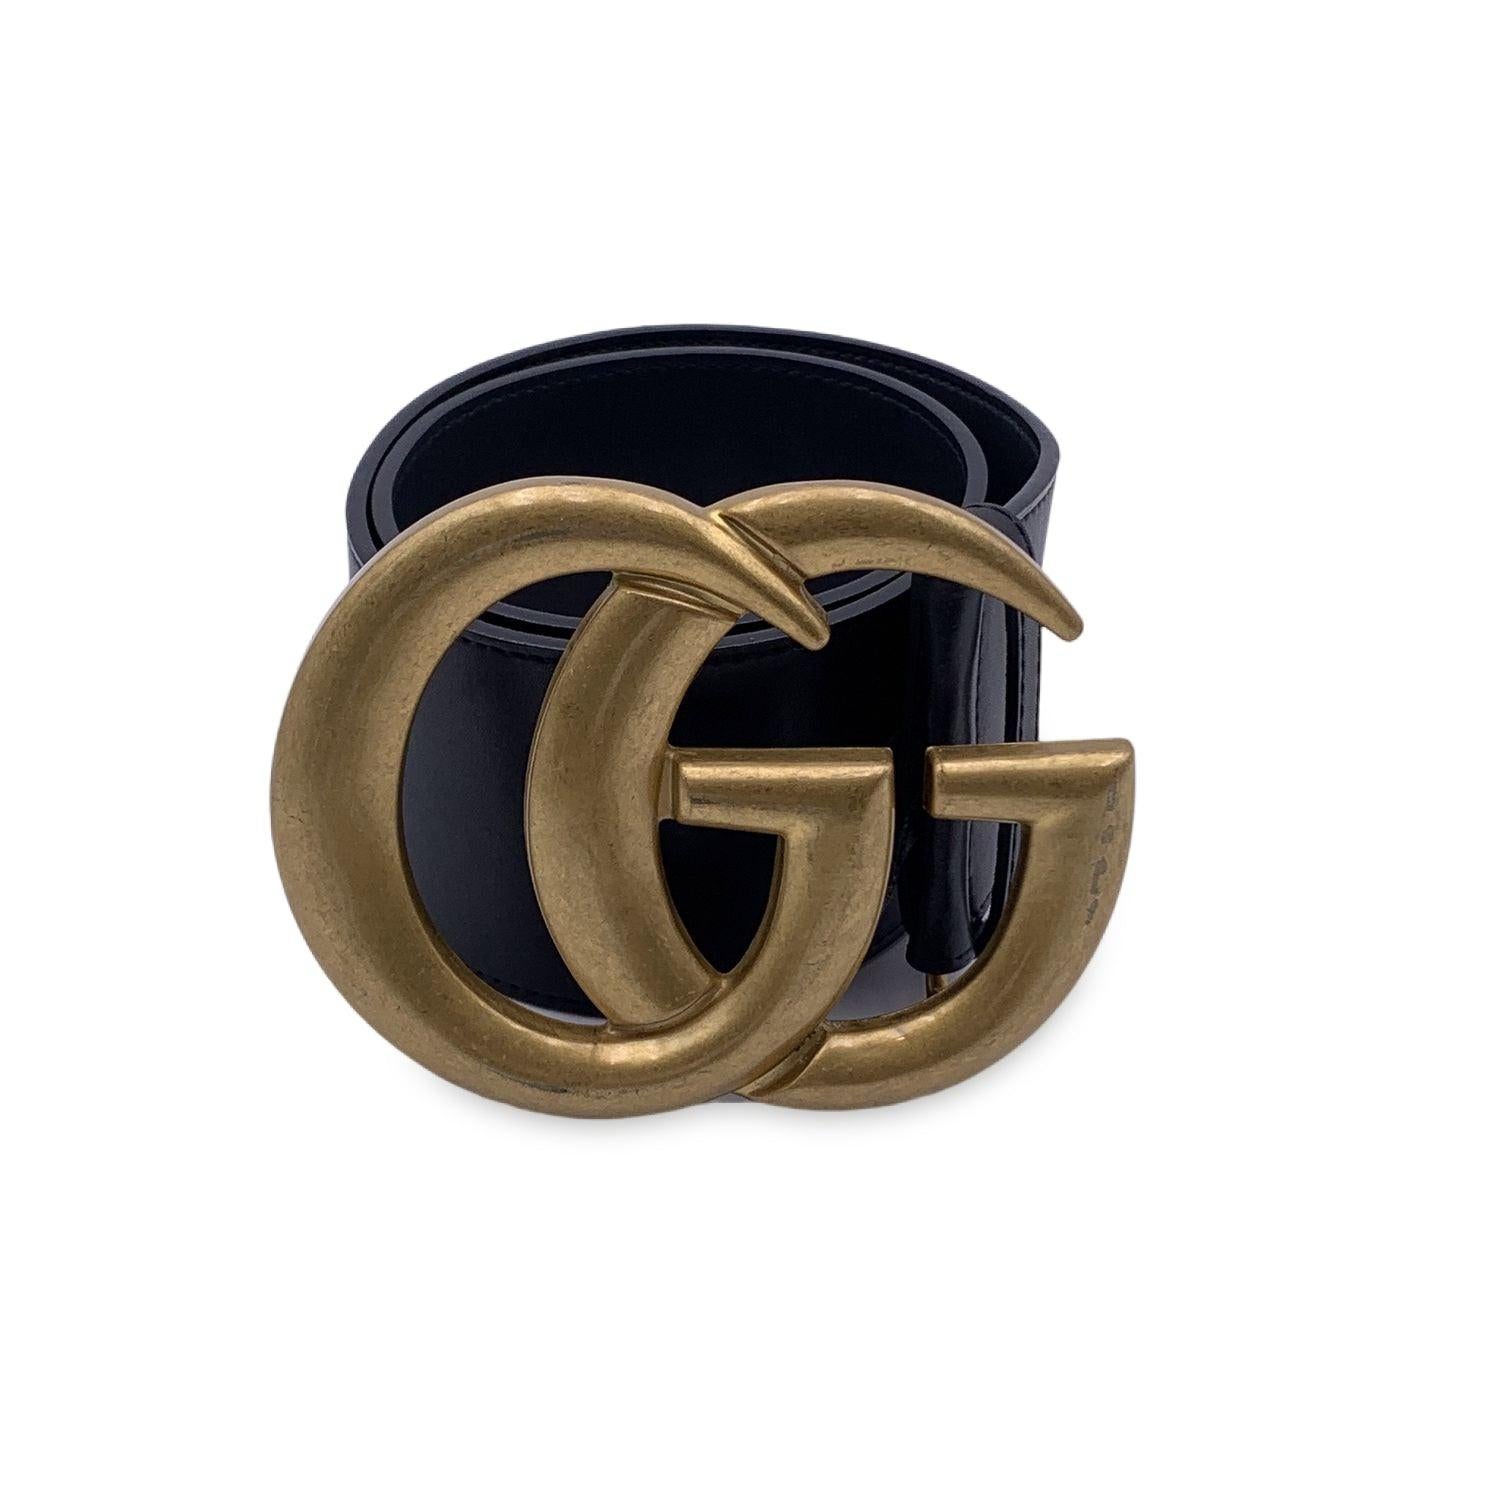 Gucci Marmont wide belt in black leather with GG logo pattern. Big gold metal GG buckle. Width: 2.6 inches - 6.7 cm. 'GUCCI - Made in Italy' engraved on the reverse of the belt, serial number engraved on the reverse of the belt. 5 holes adjustment.